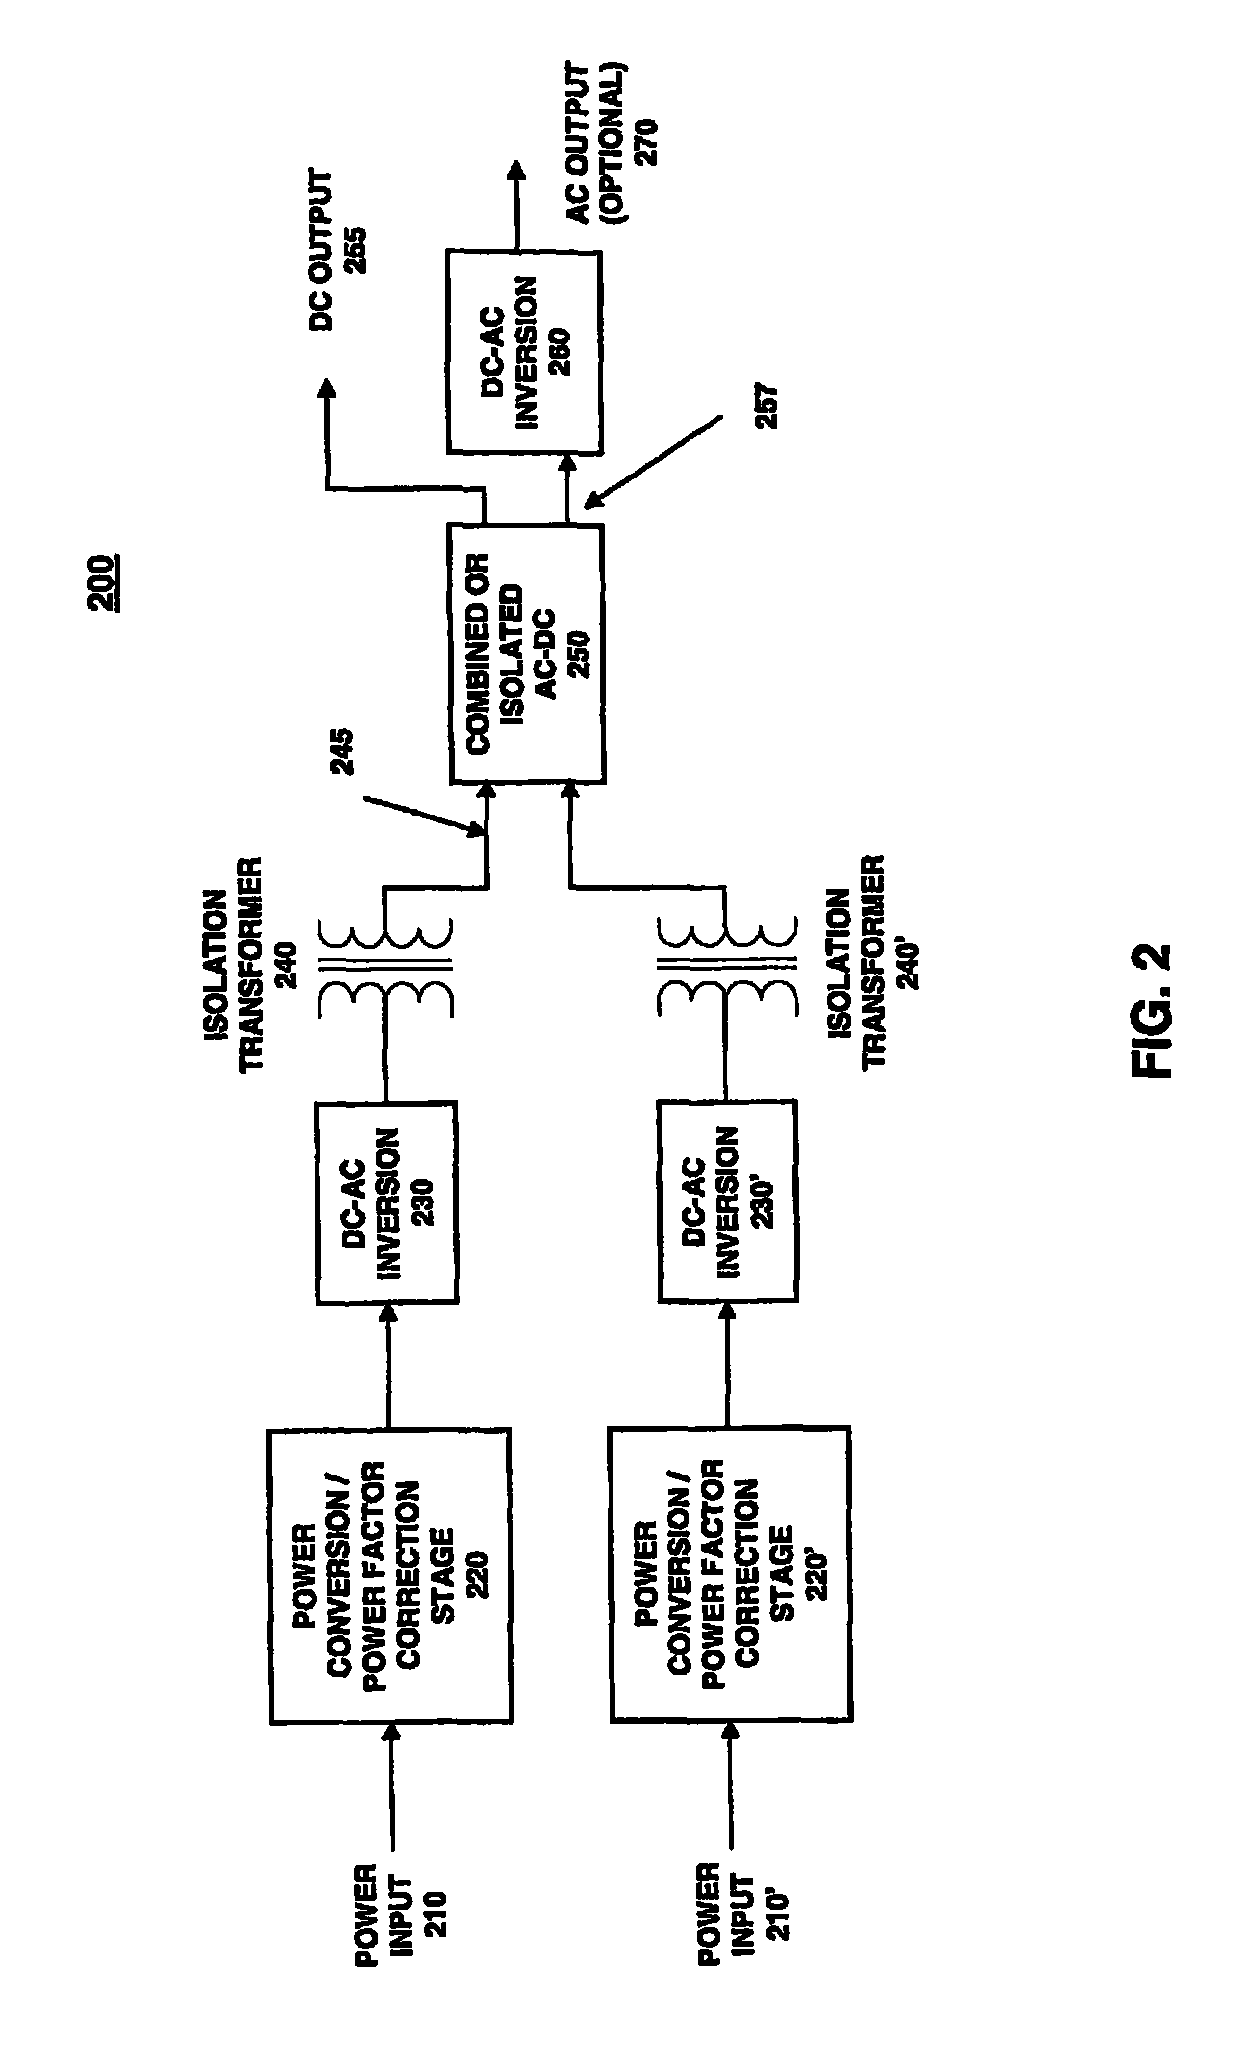 System and method for electrical power conversion